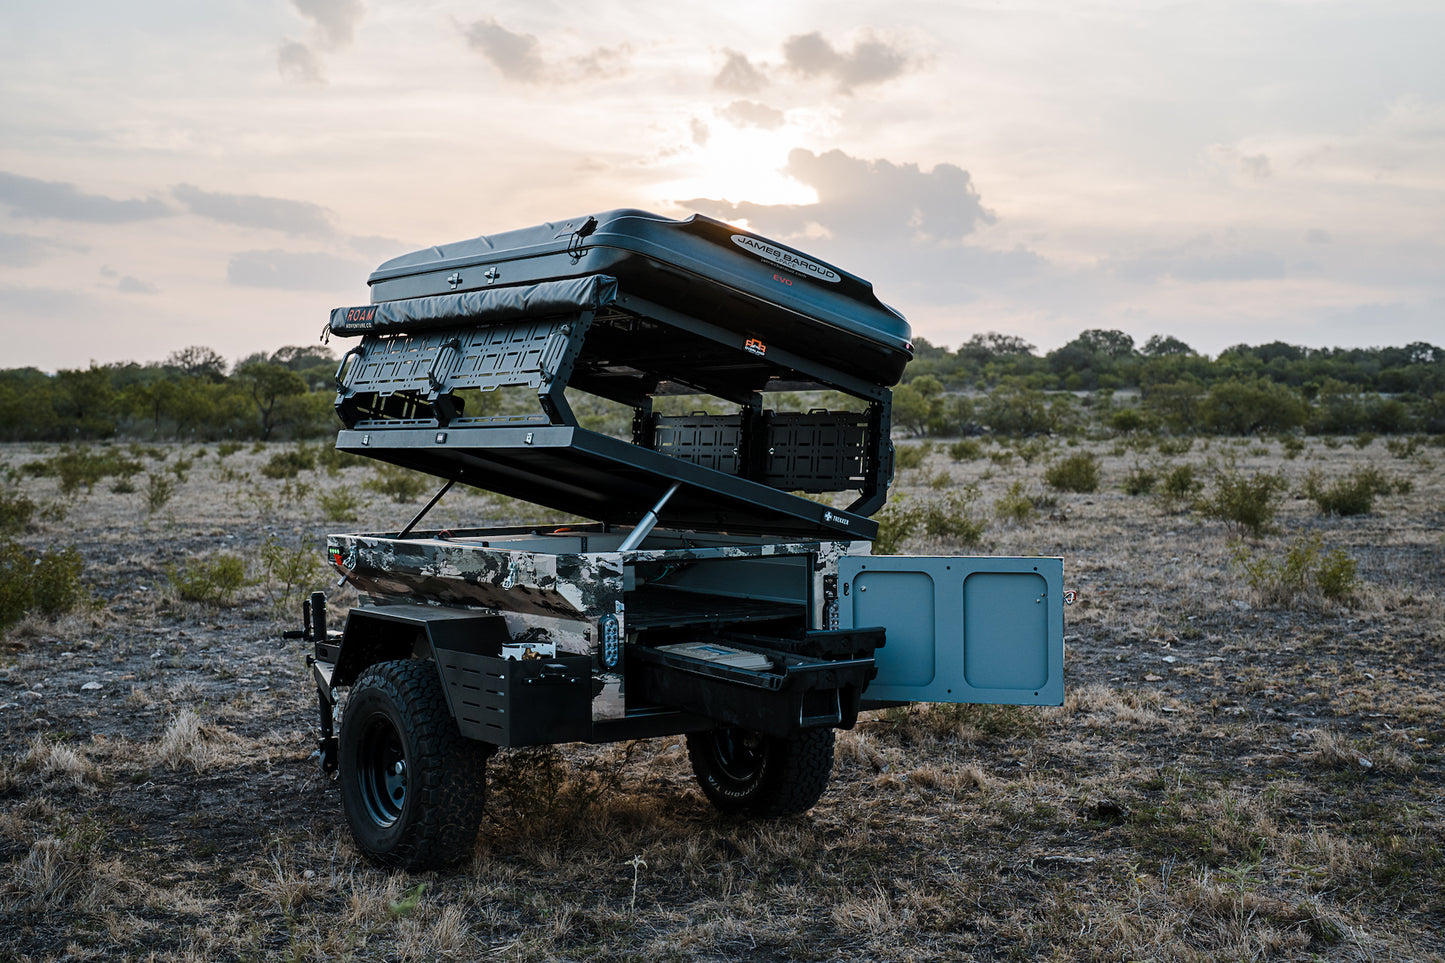 rustic mountain overland utility camping trailers for sale near new mexico oklahoma arkansas texas at hawkes outdoors 210-251-2882